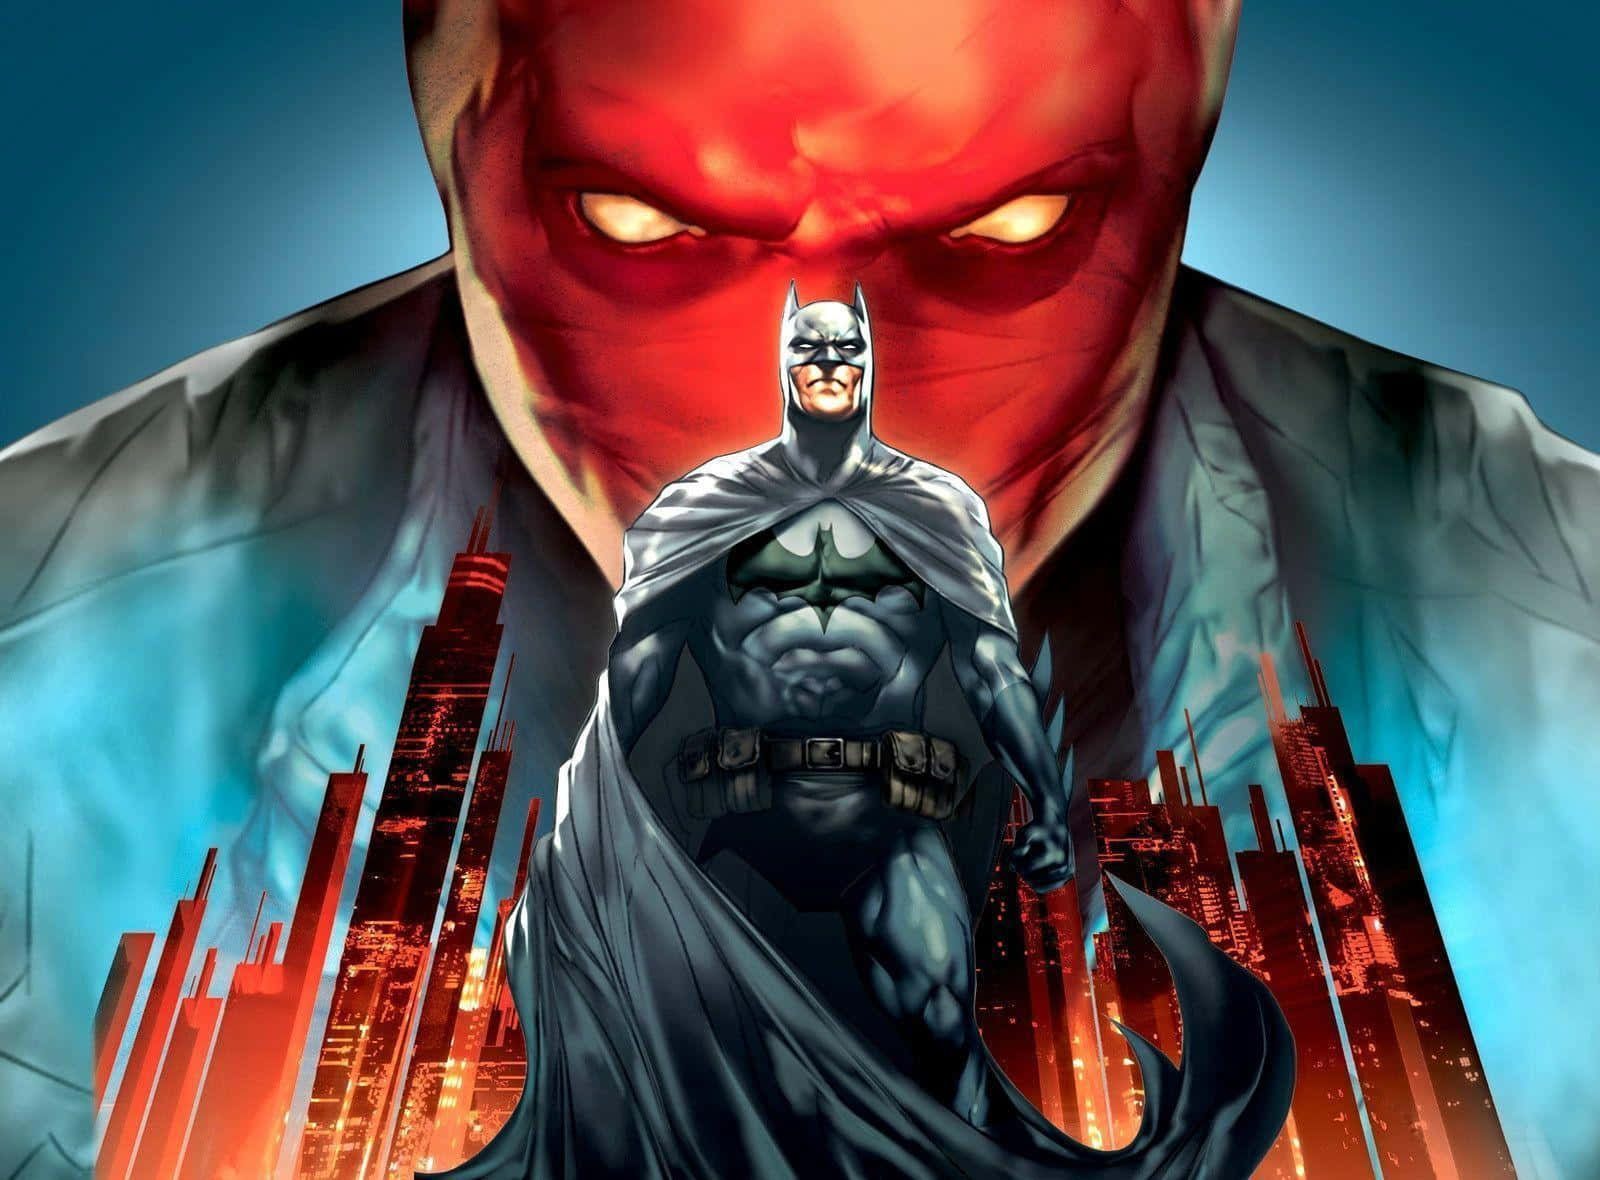 Caption: Batman and Red Hood Face Off in Intense Showdown Wallpaper